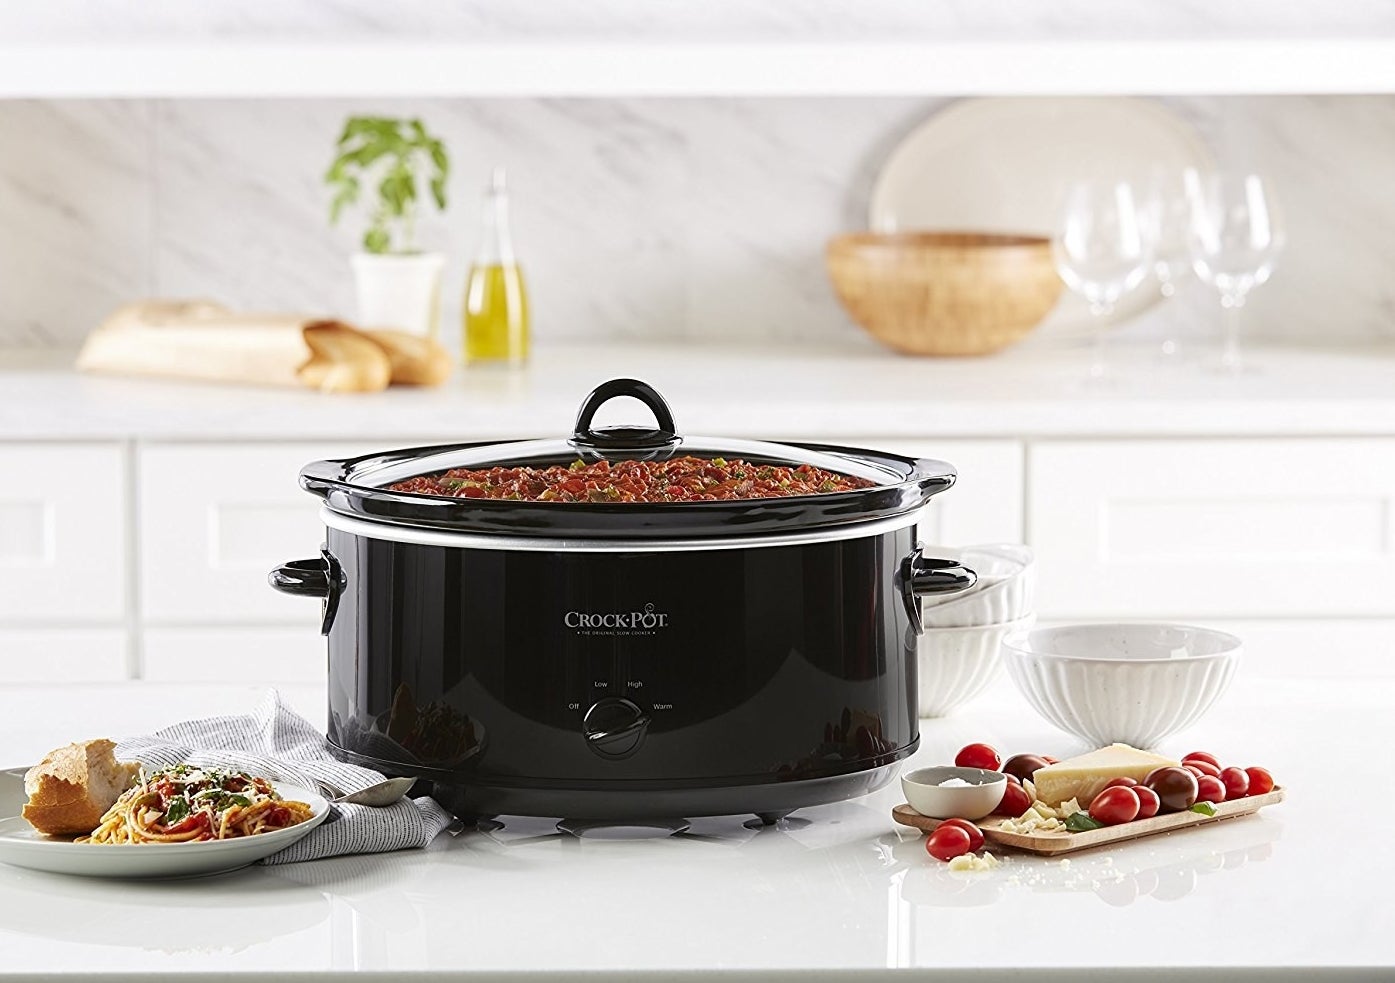 The crock pot filled with and surrounded by food